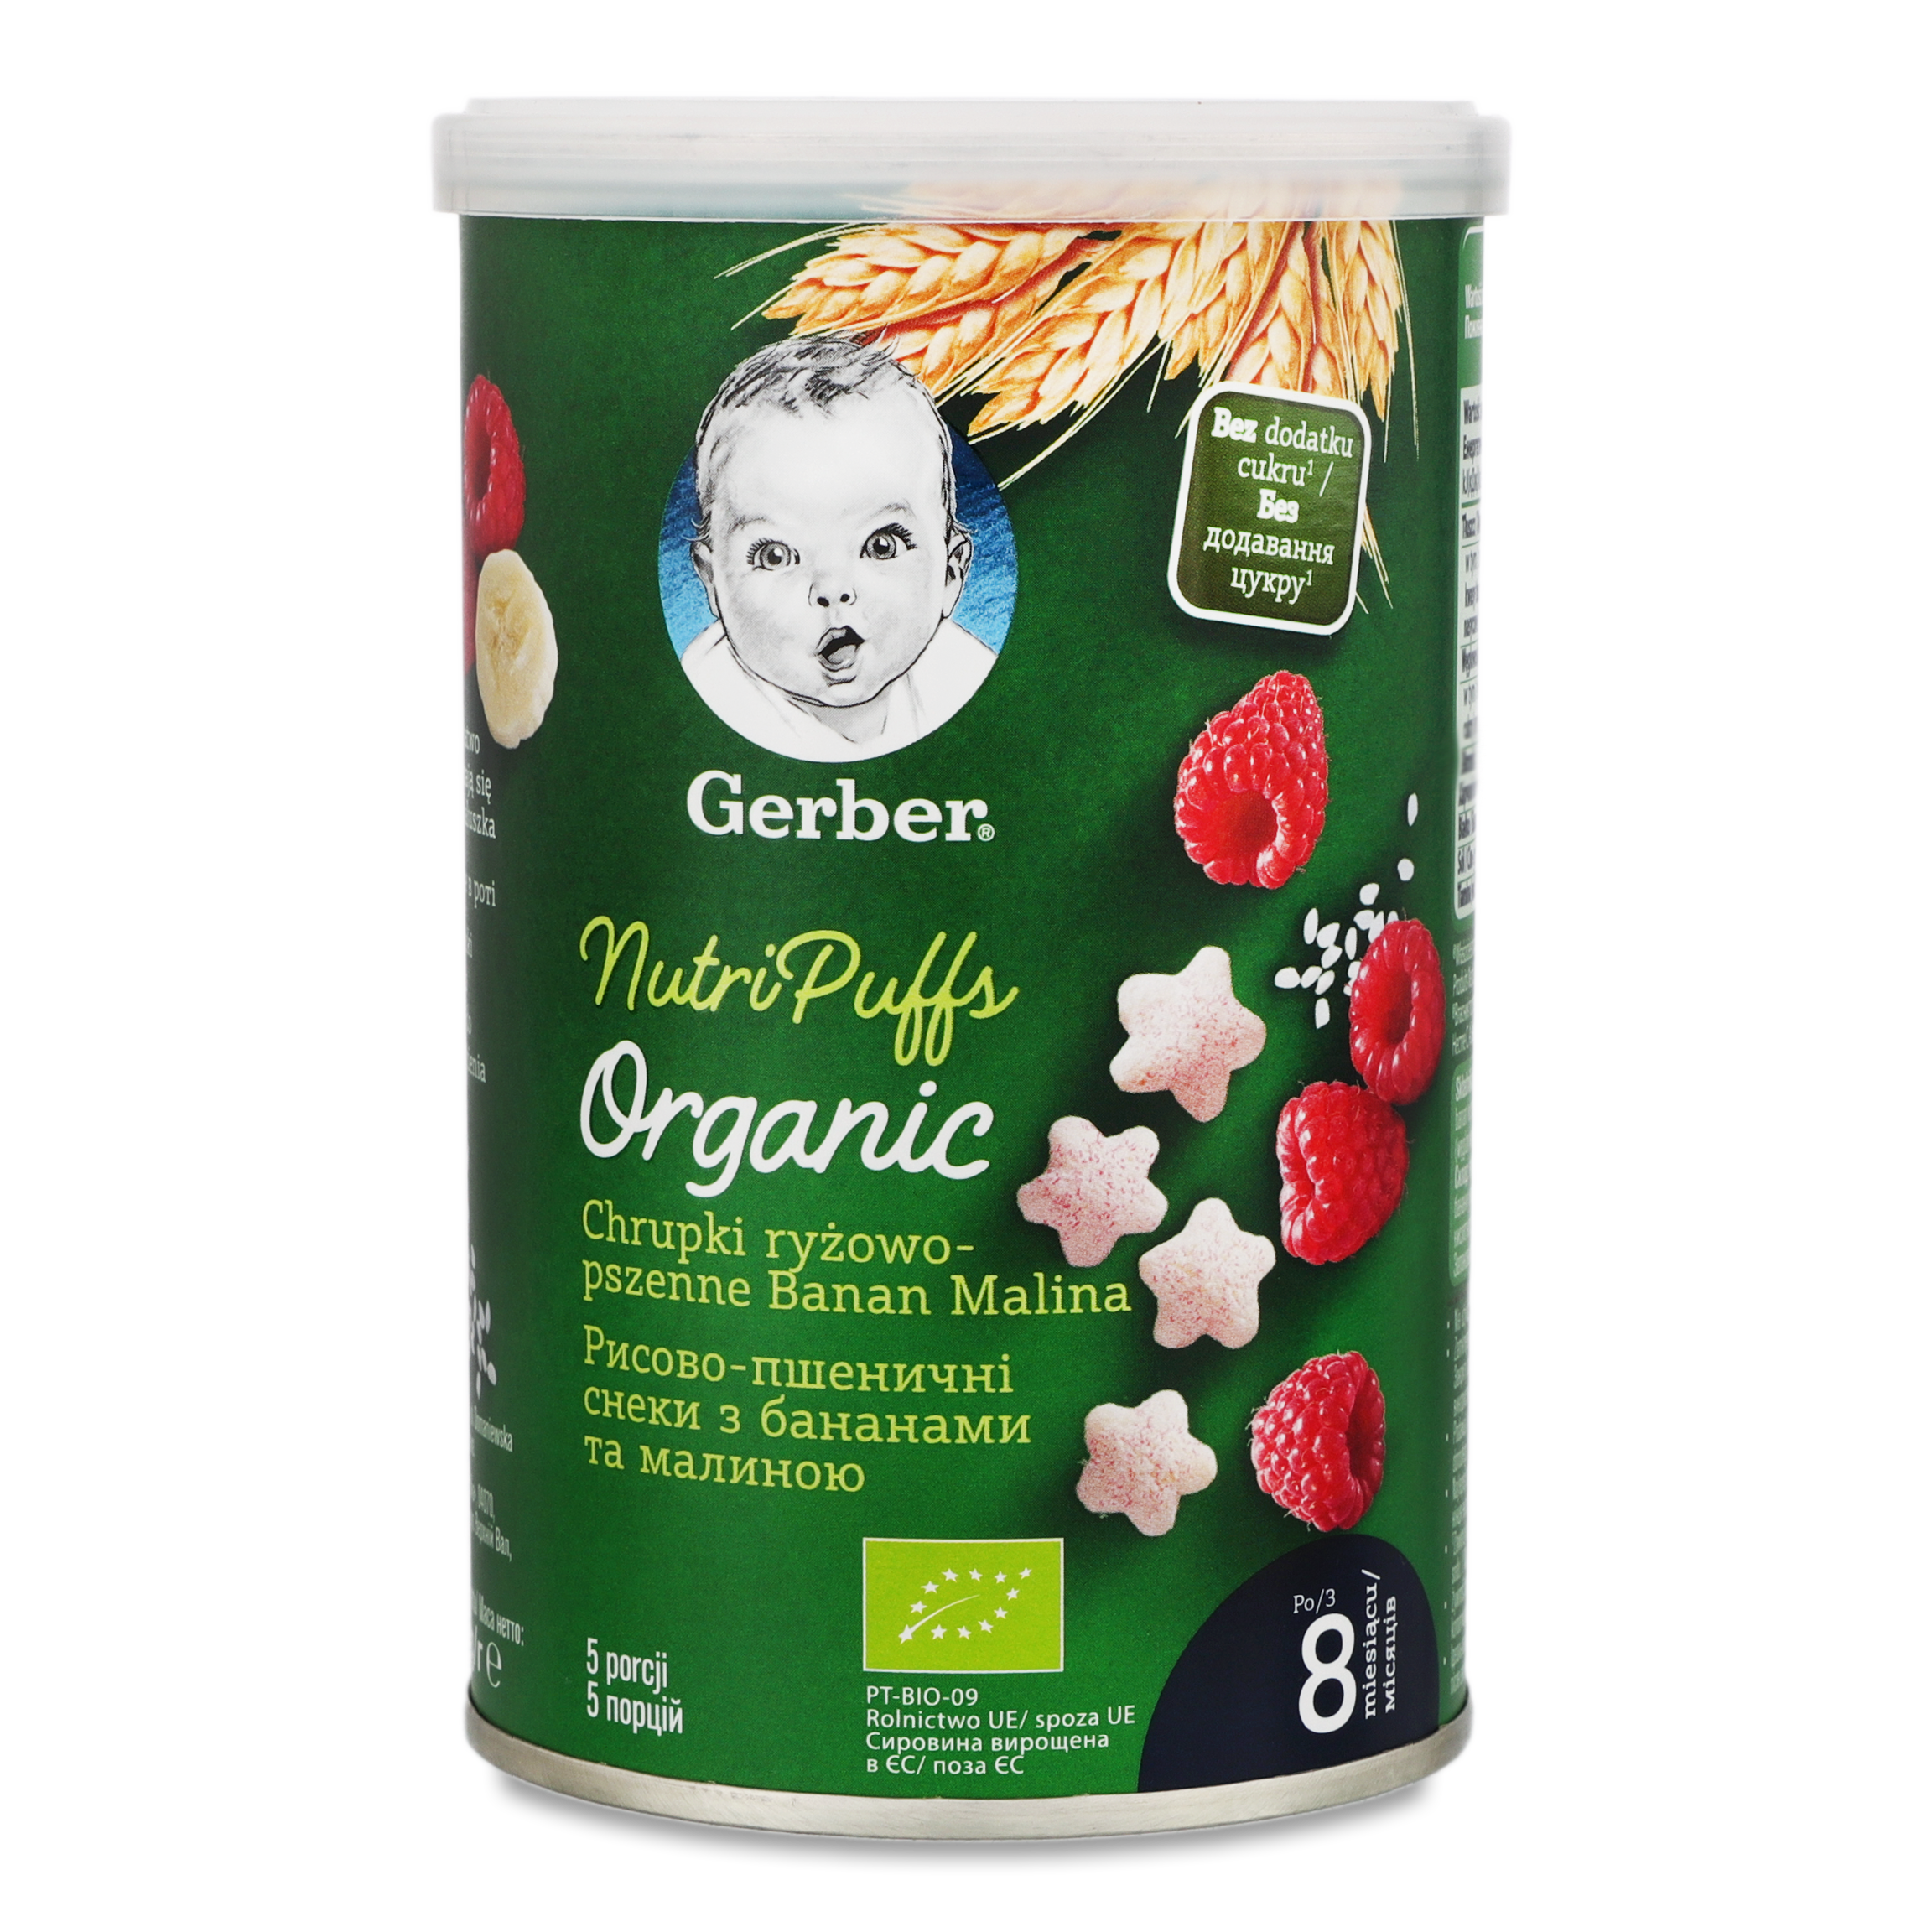 Gerber Organic Nutri Puffs Rice-Wheat Snack with Banana and Raspberry 35g